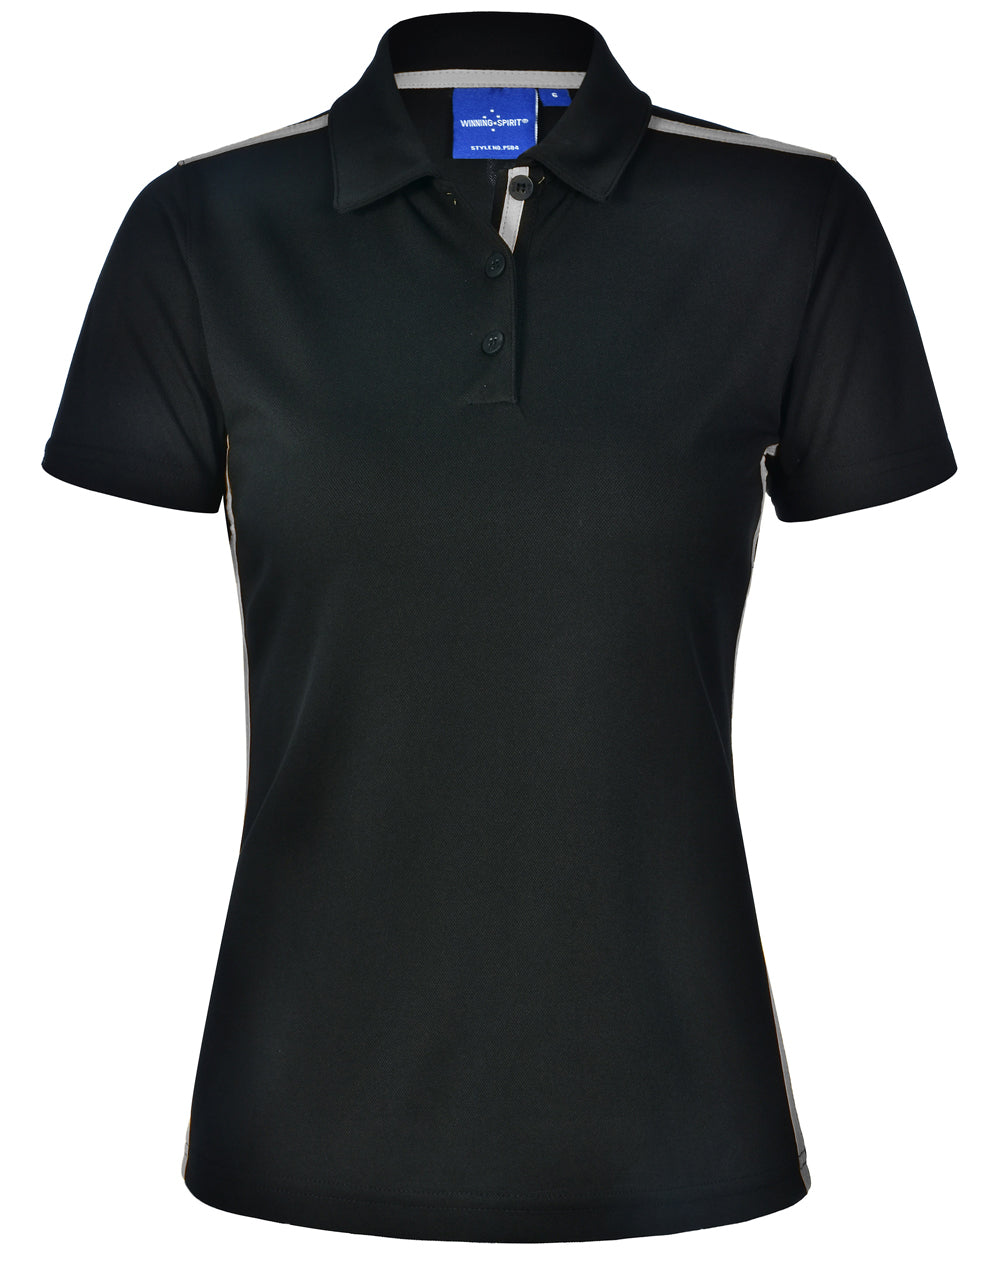 [PS84] Ladies' rapid cool short sleeve contrast polo